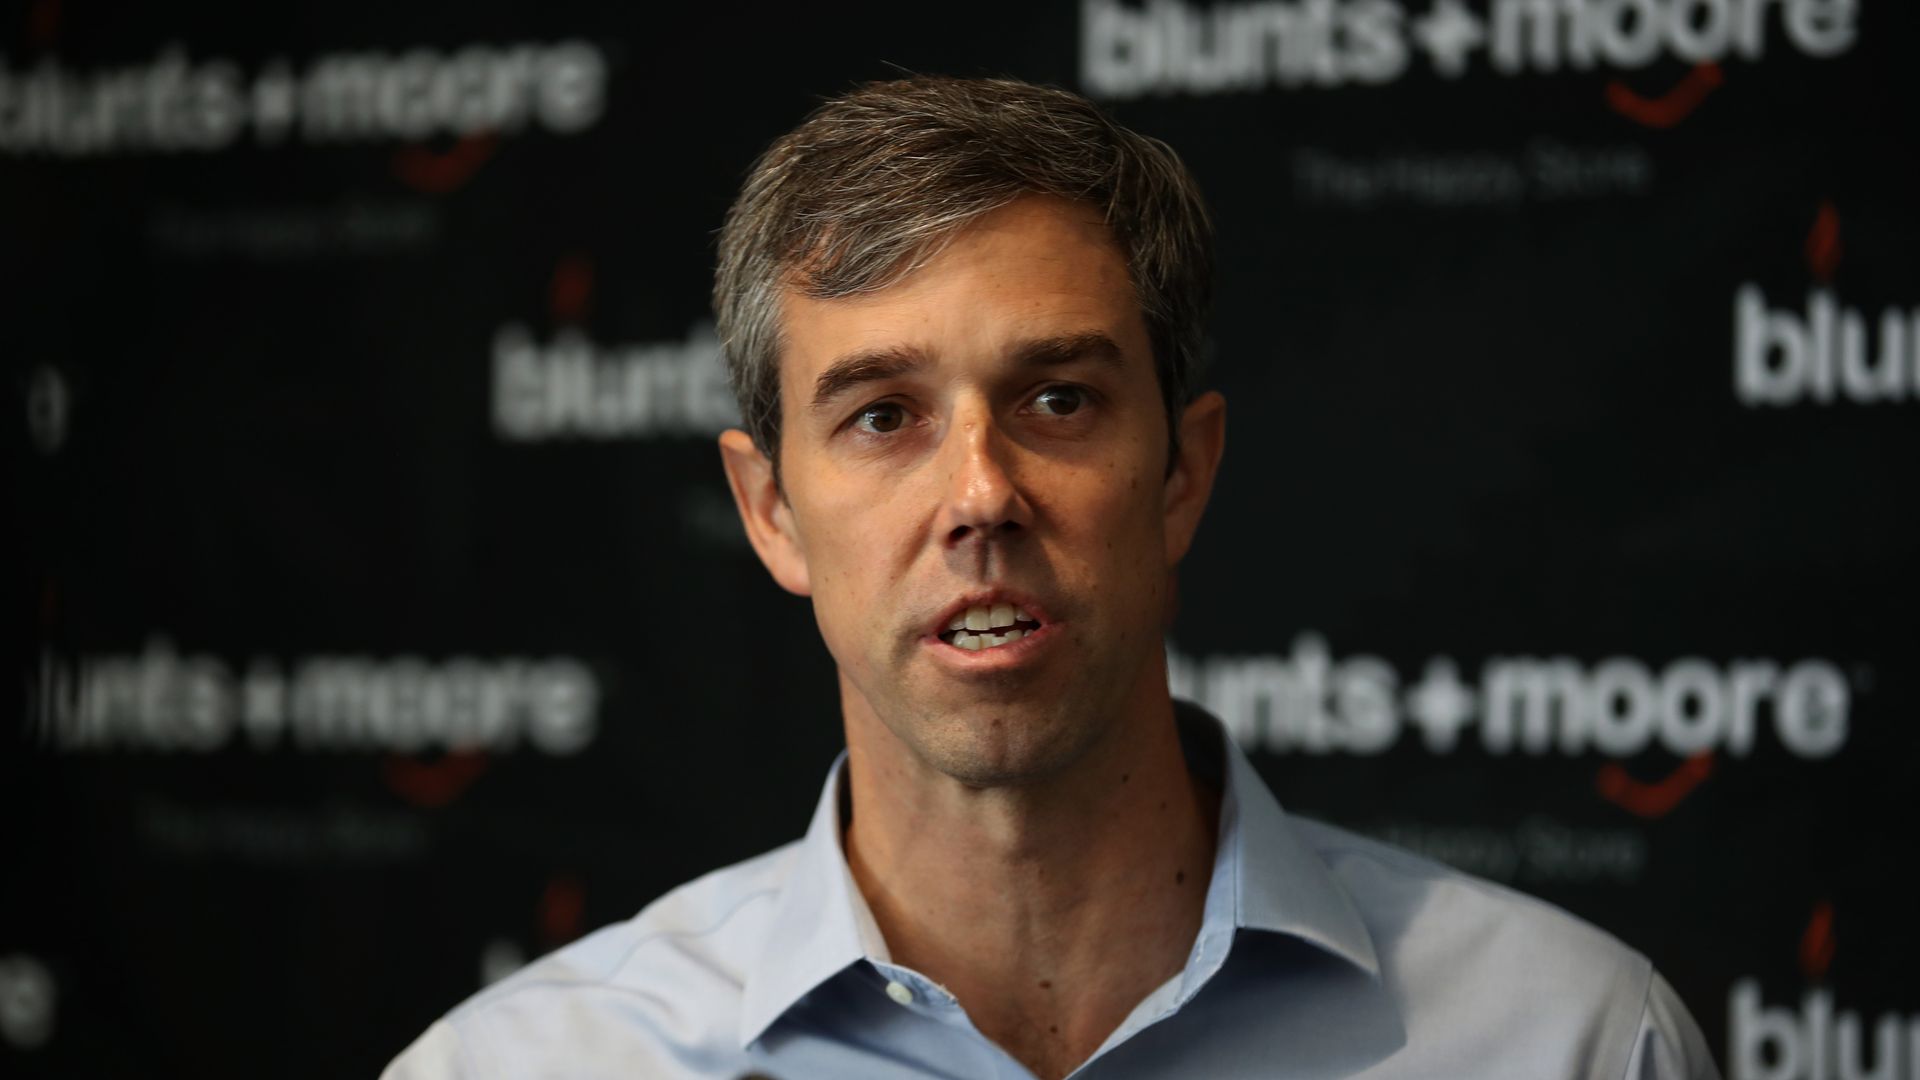 Beto O'Rourke holds a microphone.